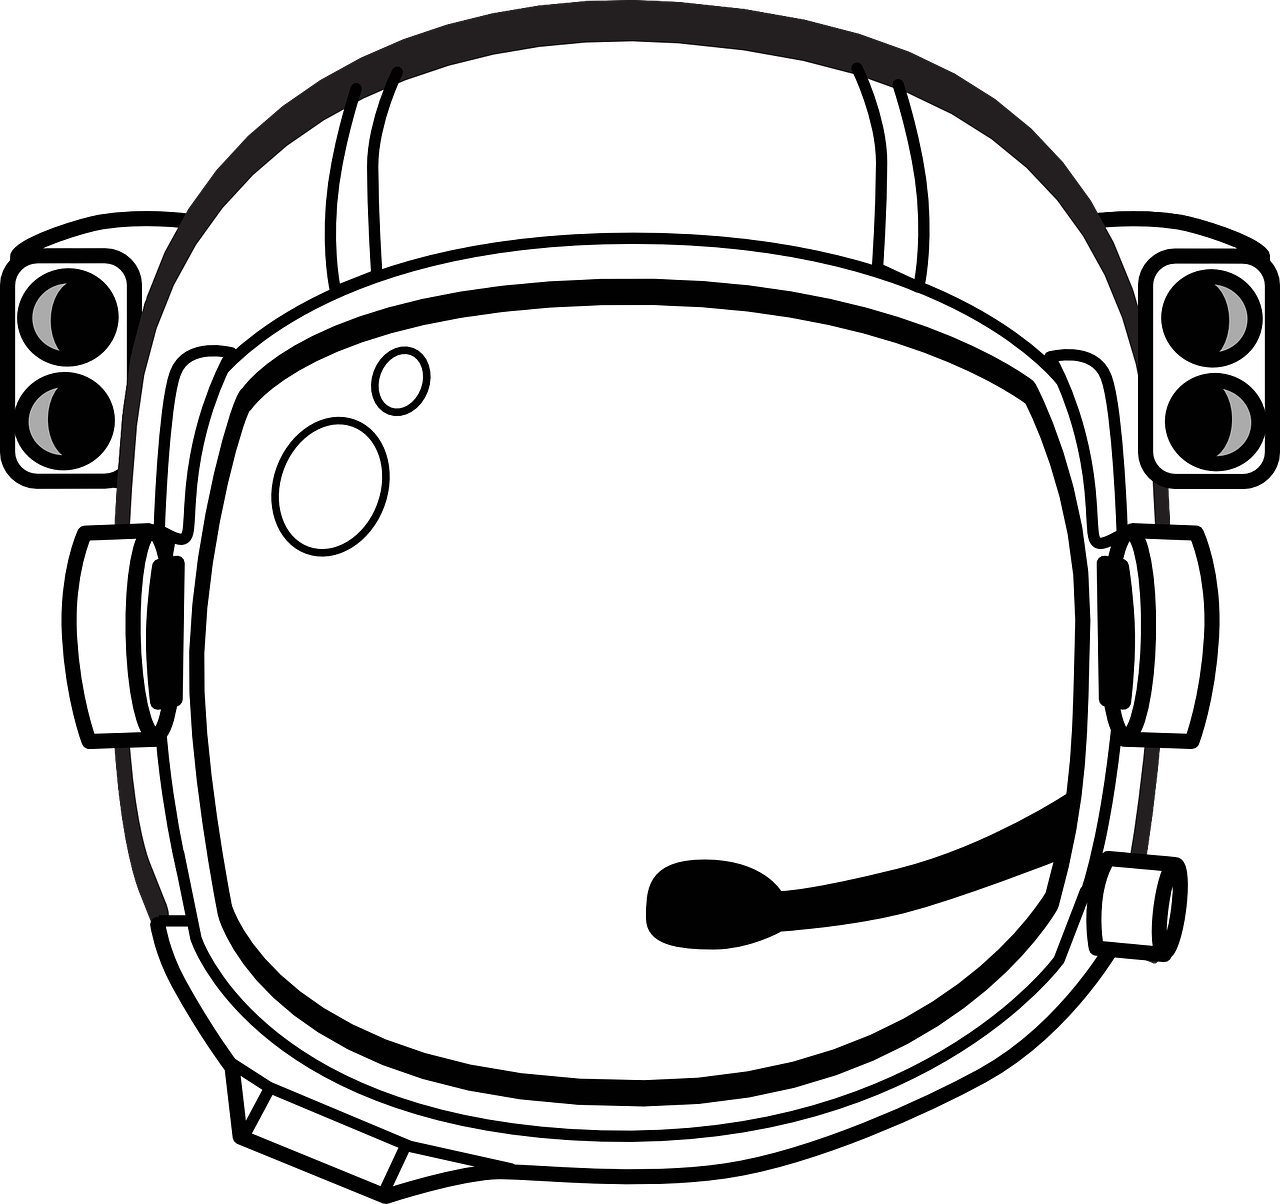 helmet,astronaut,cosmonaut,spaceman,space,helm,technology,suit,spacesuit,uniform,science,astronomy,free vector graphics,free pictures, free photos, free images, royalty free, free illustrations, public domain